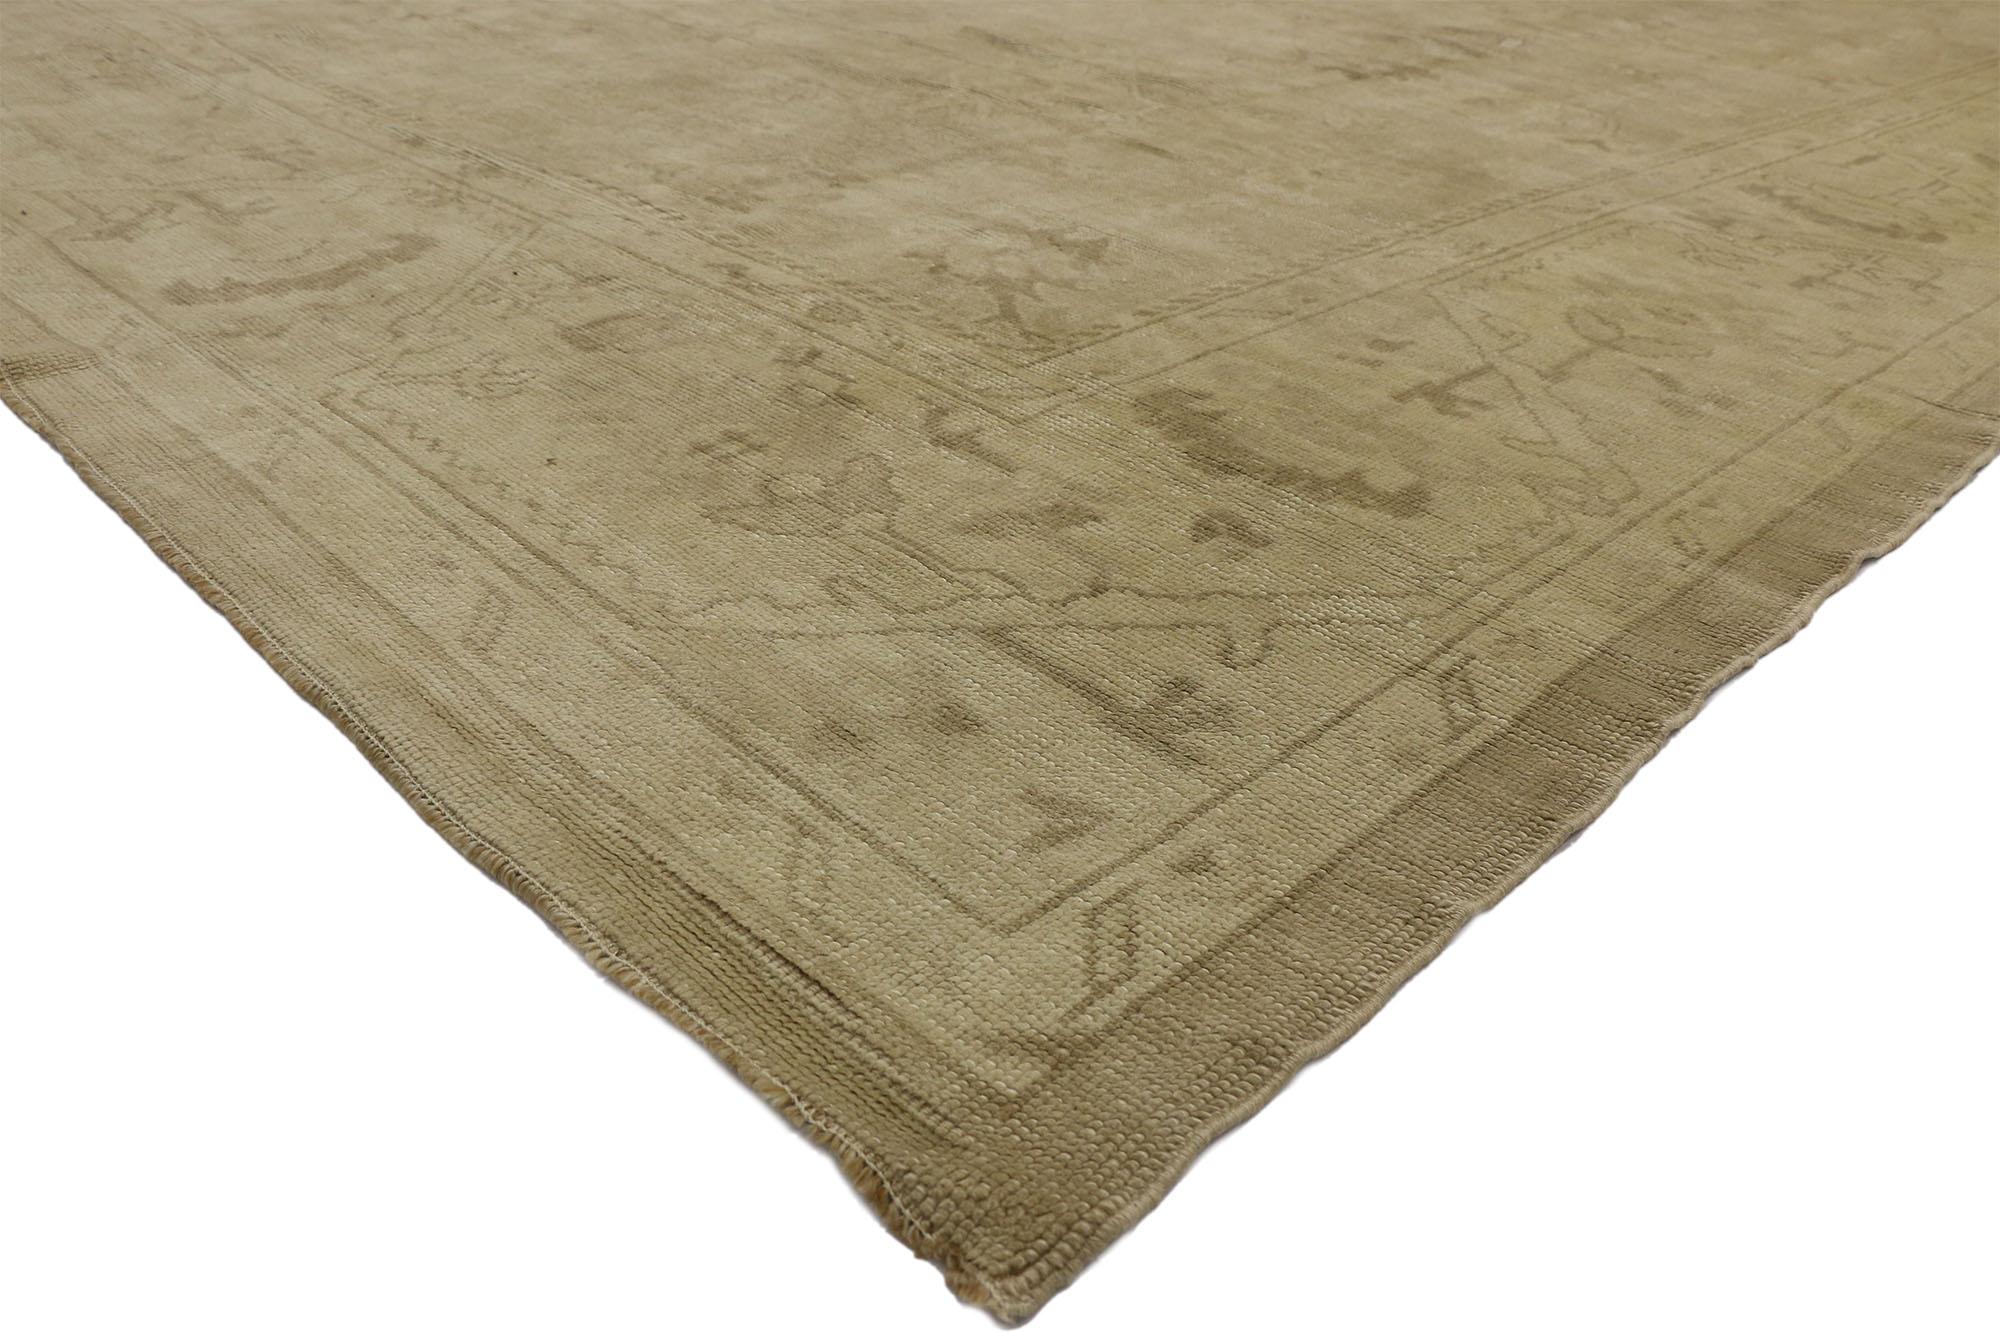 50742 New Contemporary Turkish Oushak Rug with Transitional Modern Style 11'00 x 15'04. From casual elegance to fresh and formal, relish the refinement as this modern Turkish Oushak rug in neutral colors evoke an air of warmth and comfort with its